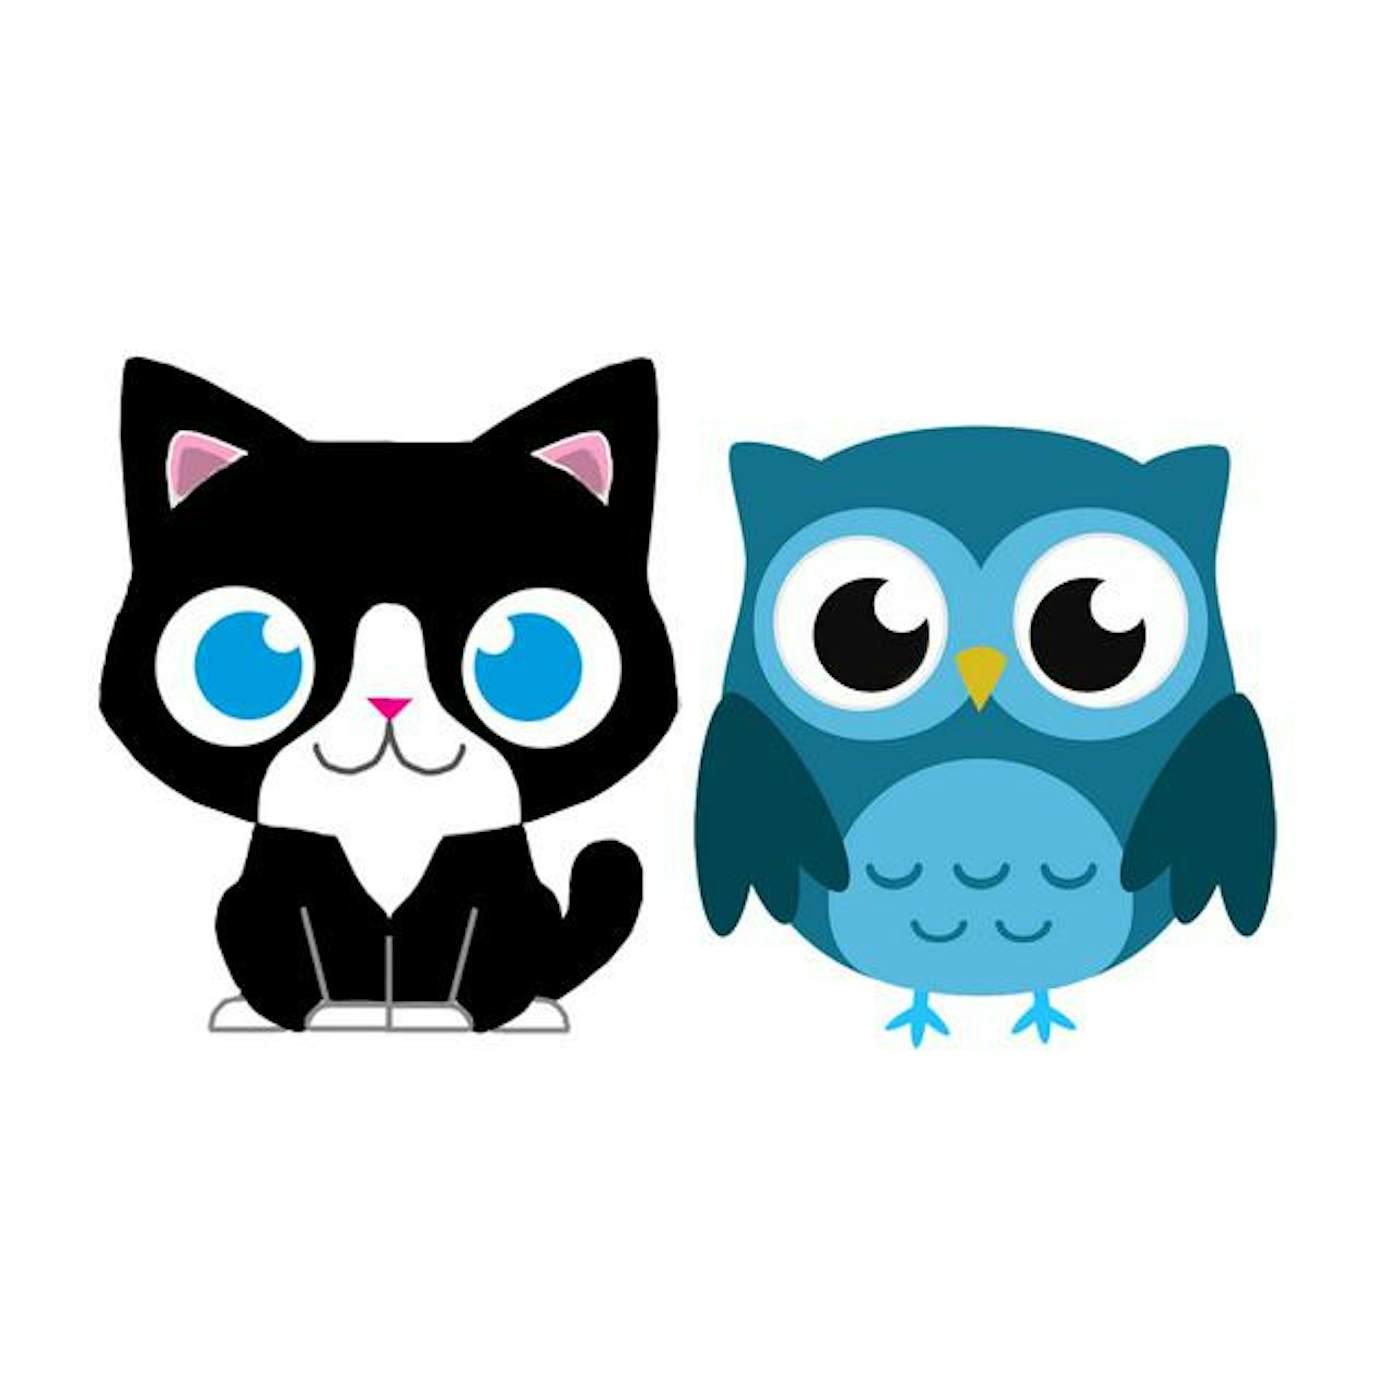 The Cat and Owl